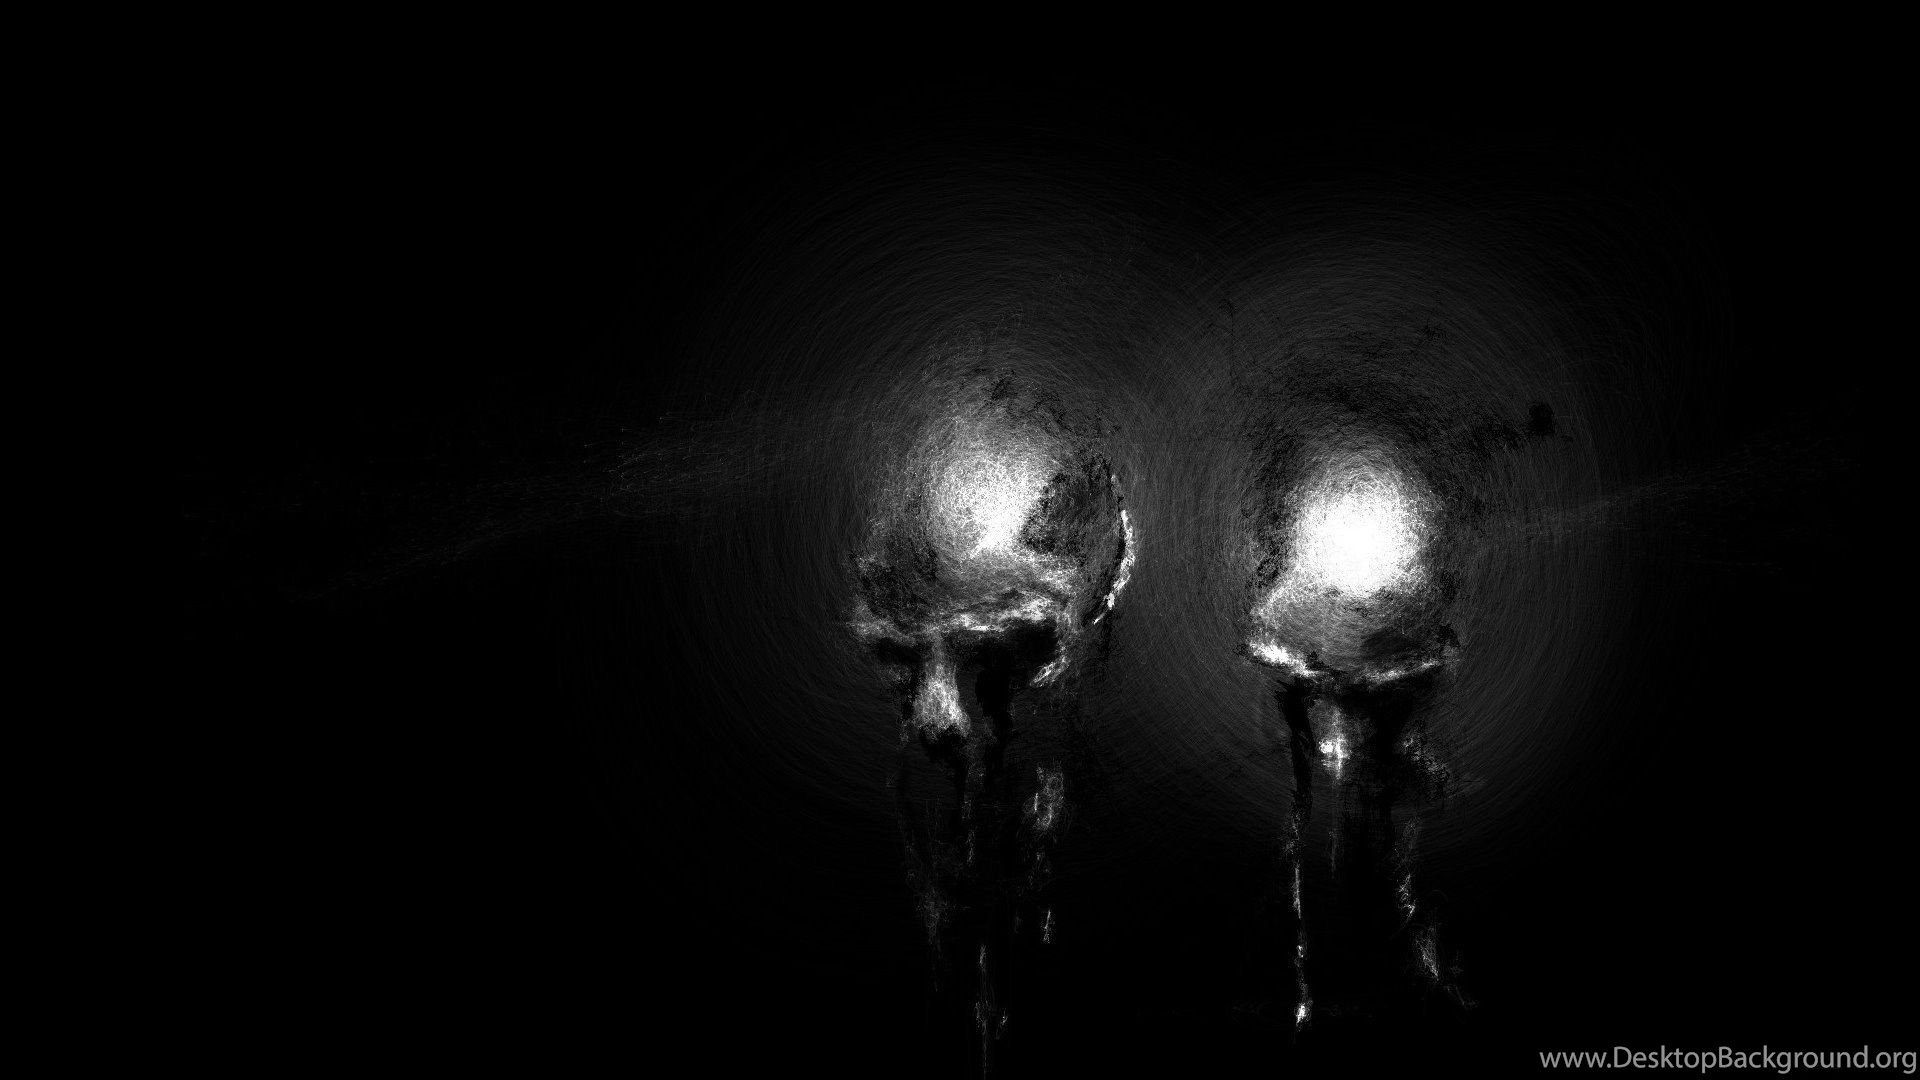 1920x1080  Cool Creepy Wallpapers (55+ images)">